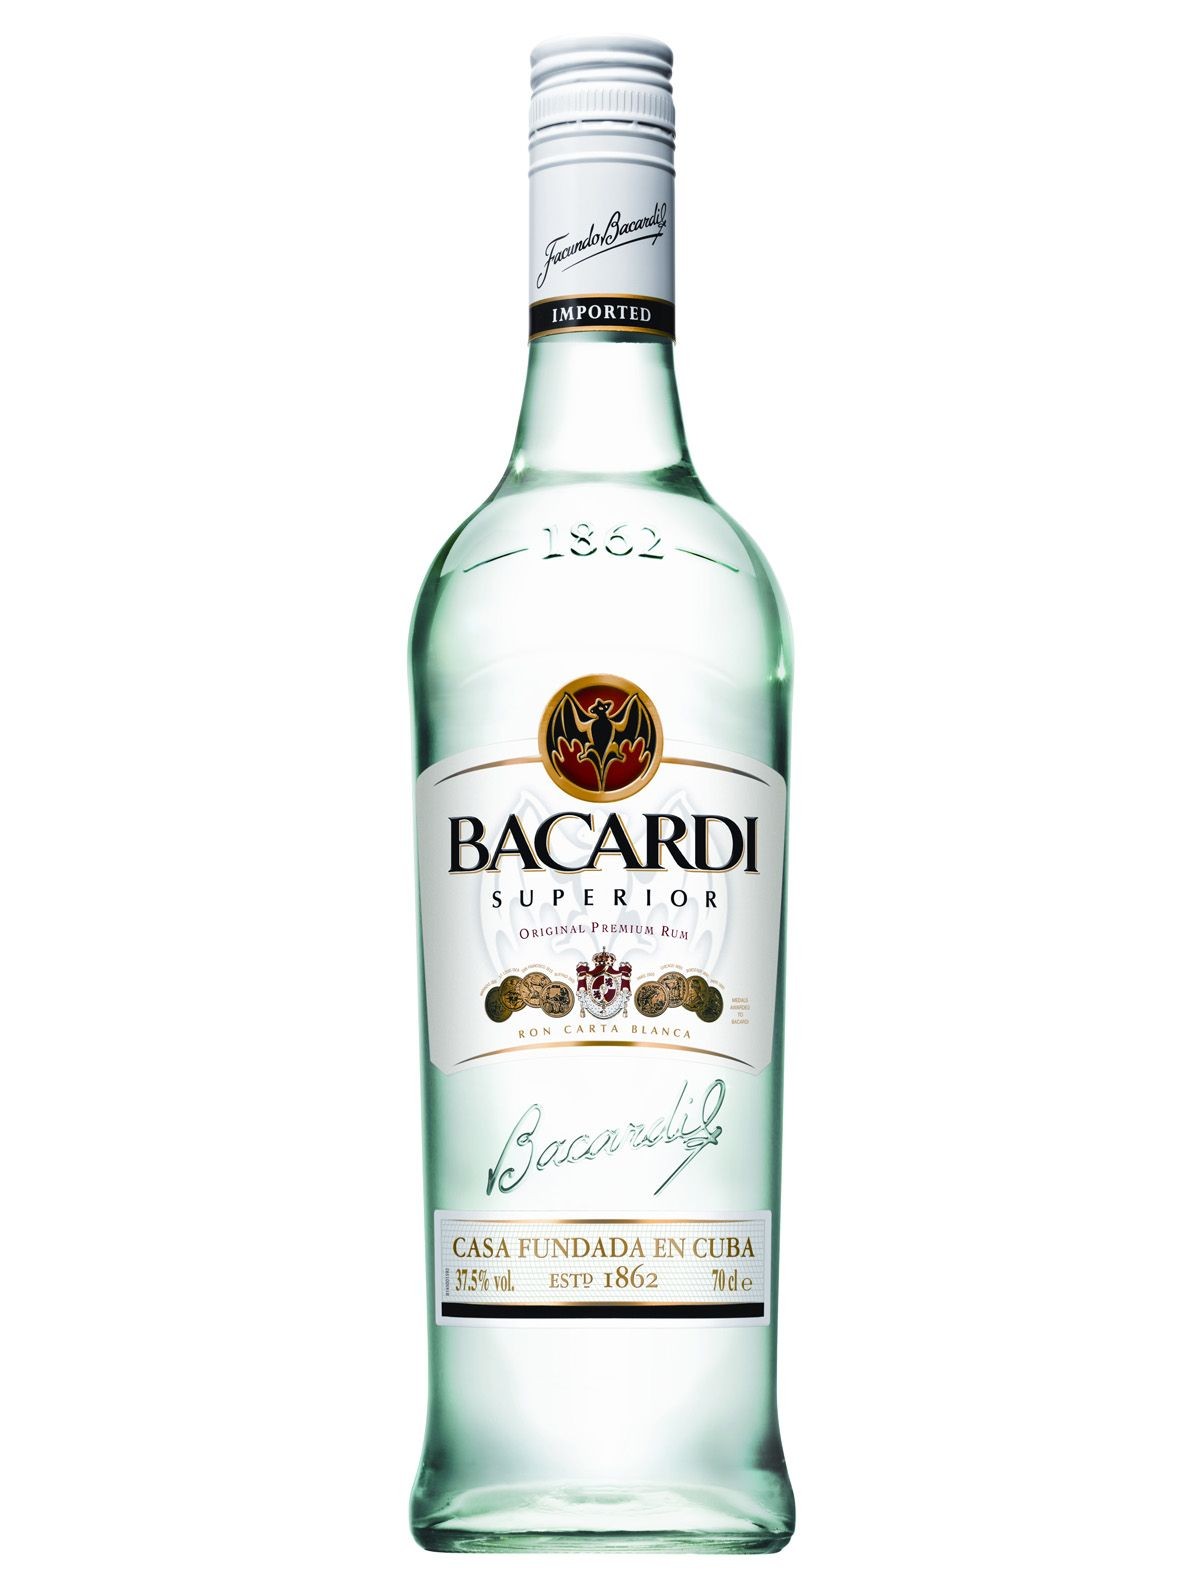 Bacardi Rum Prices - How do you Price a Switches?